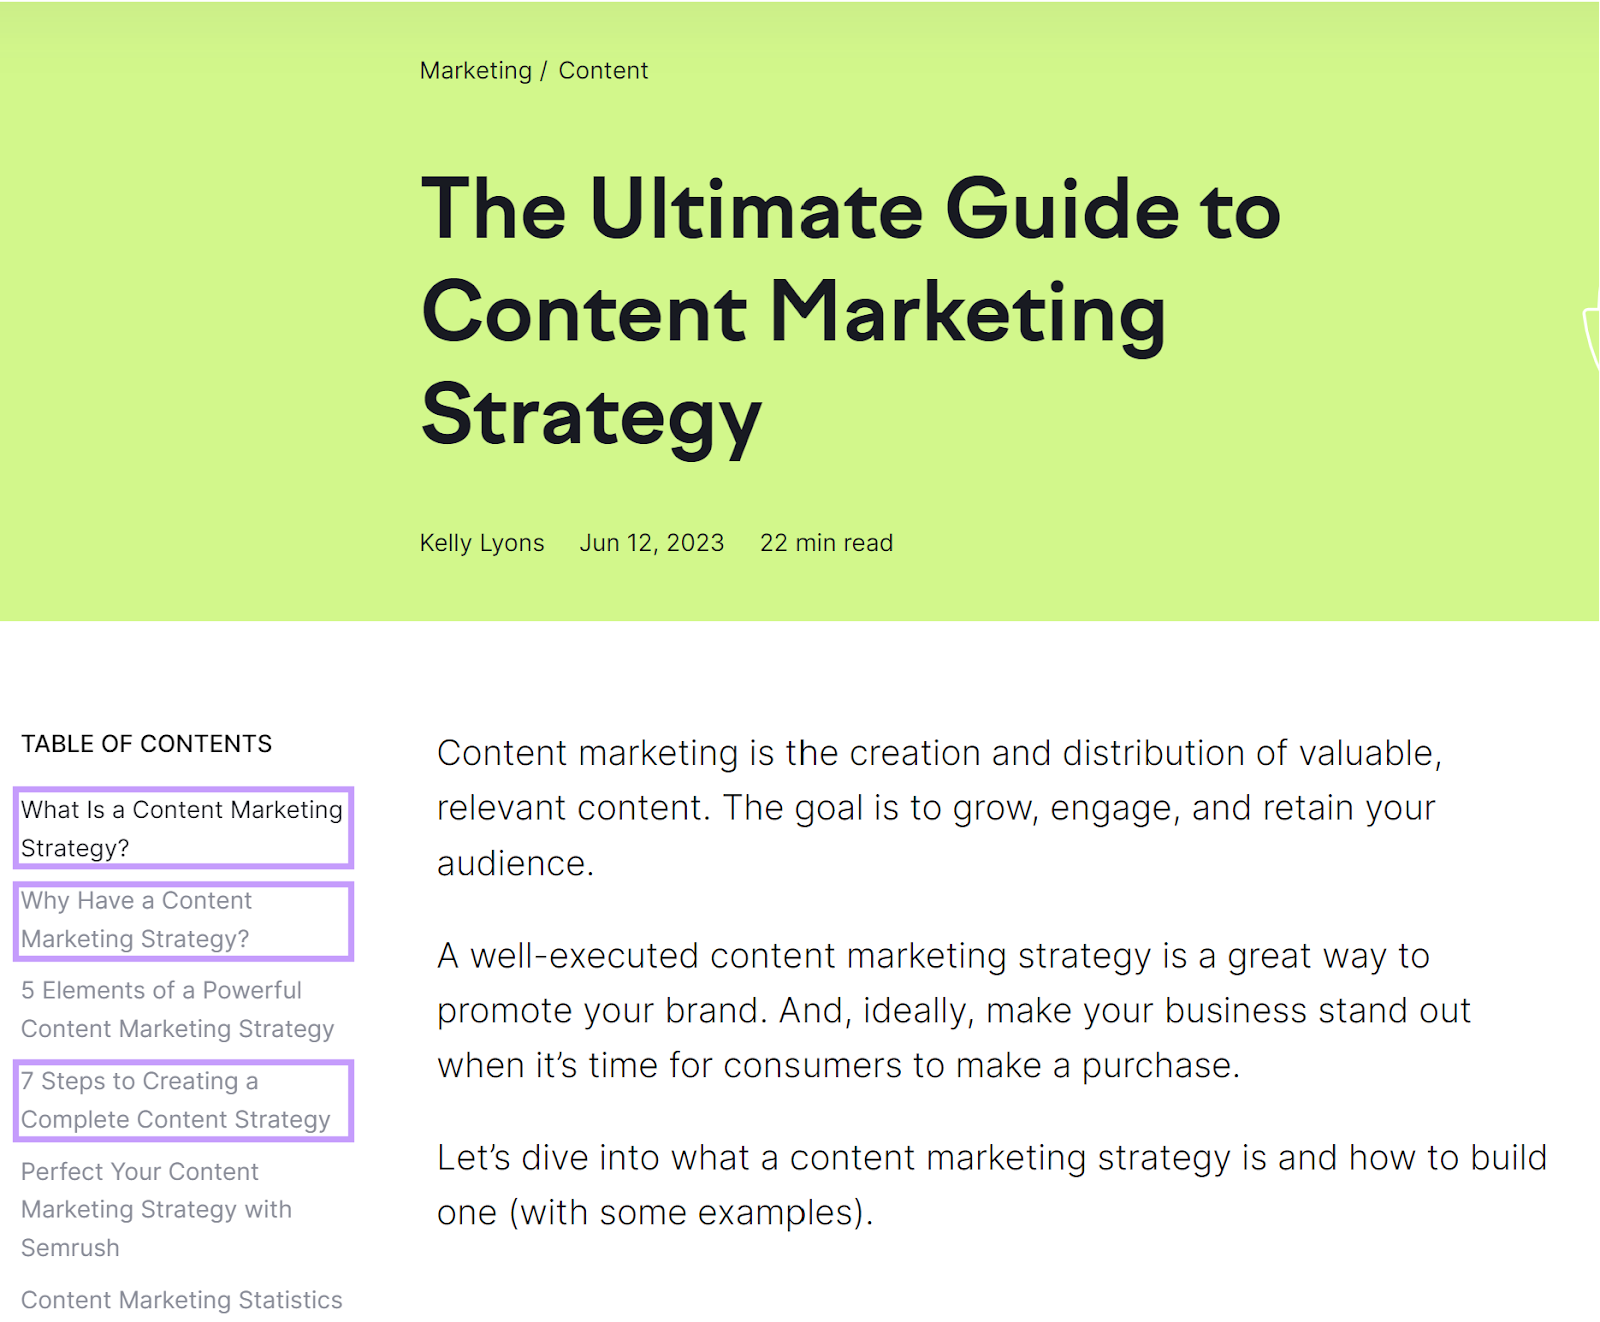 Semrush's blog titled "Ultimate Guide to Content Marketing Strategy"